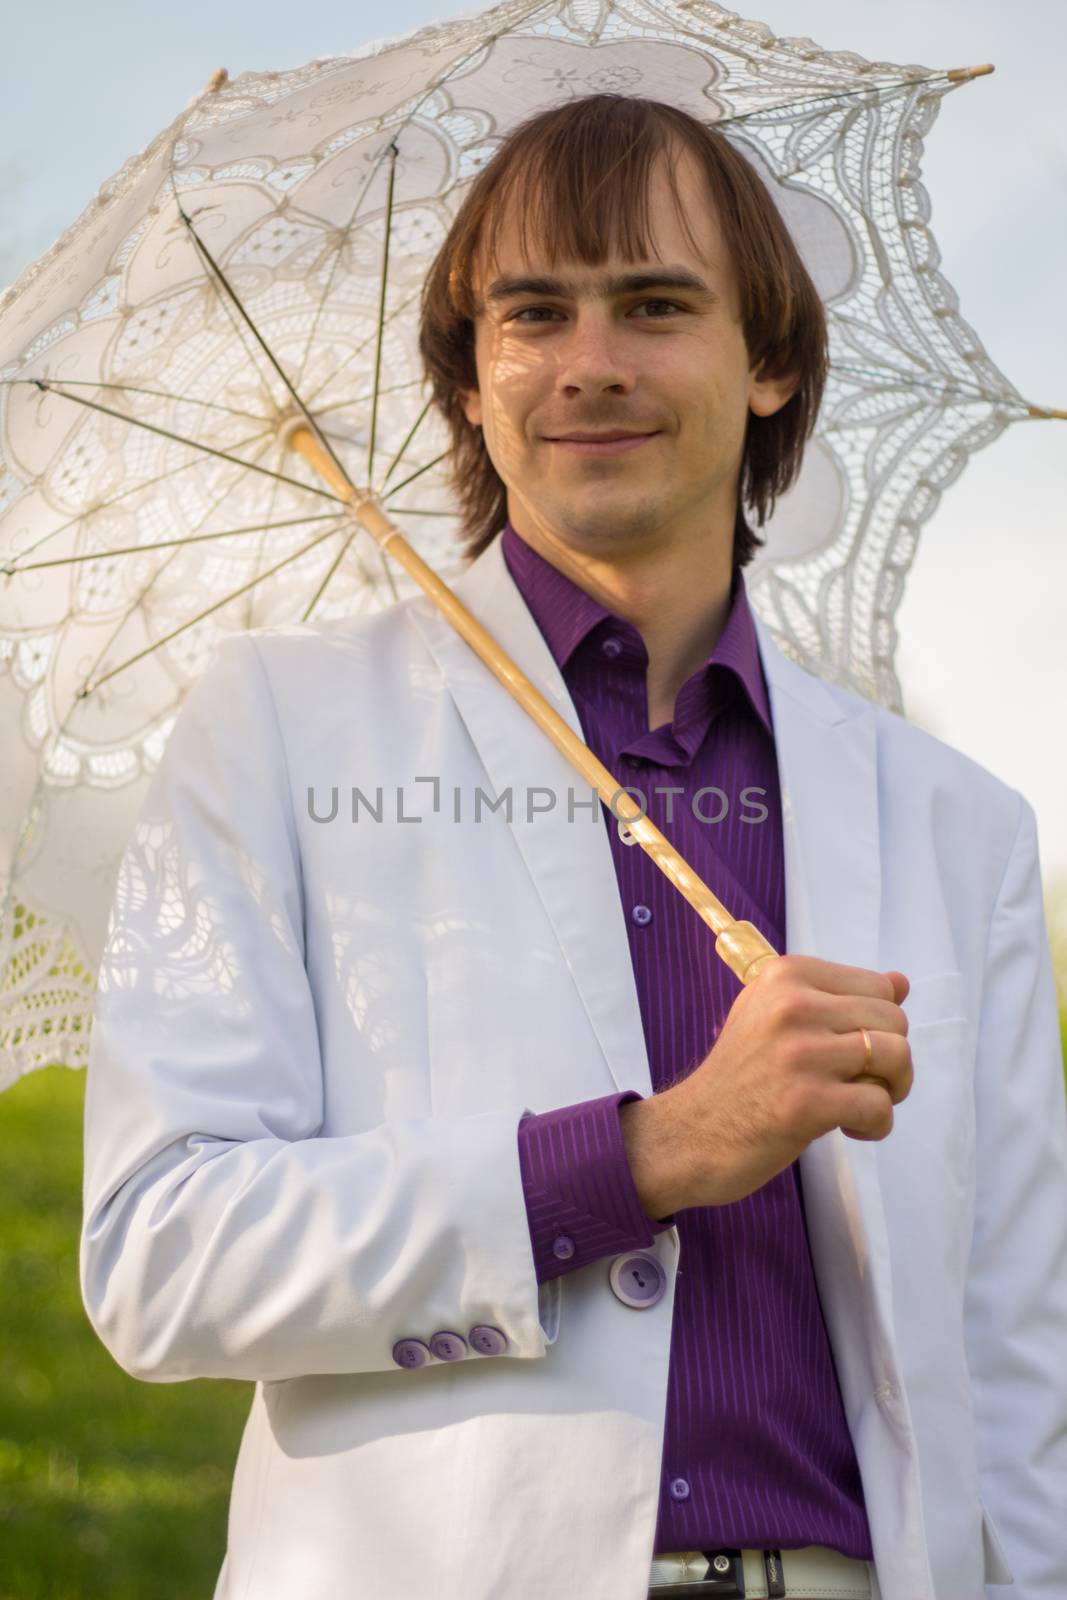 elegant man with umbrella. For your commercial and editorial use.